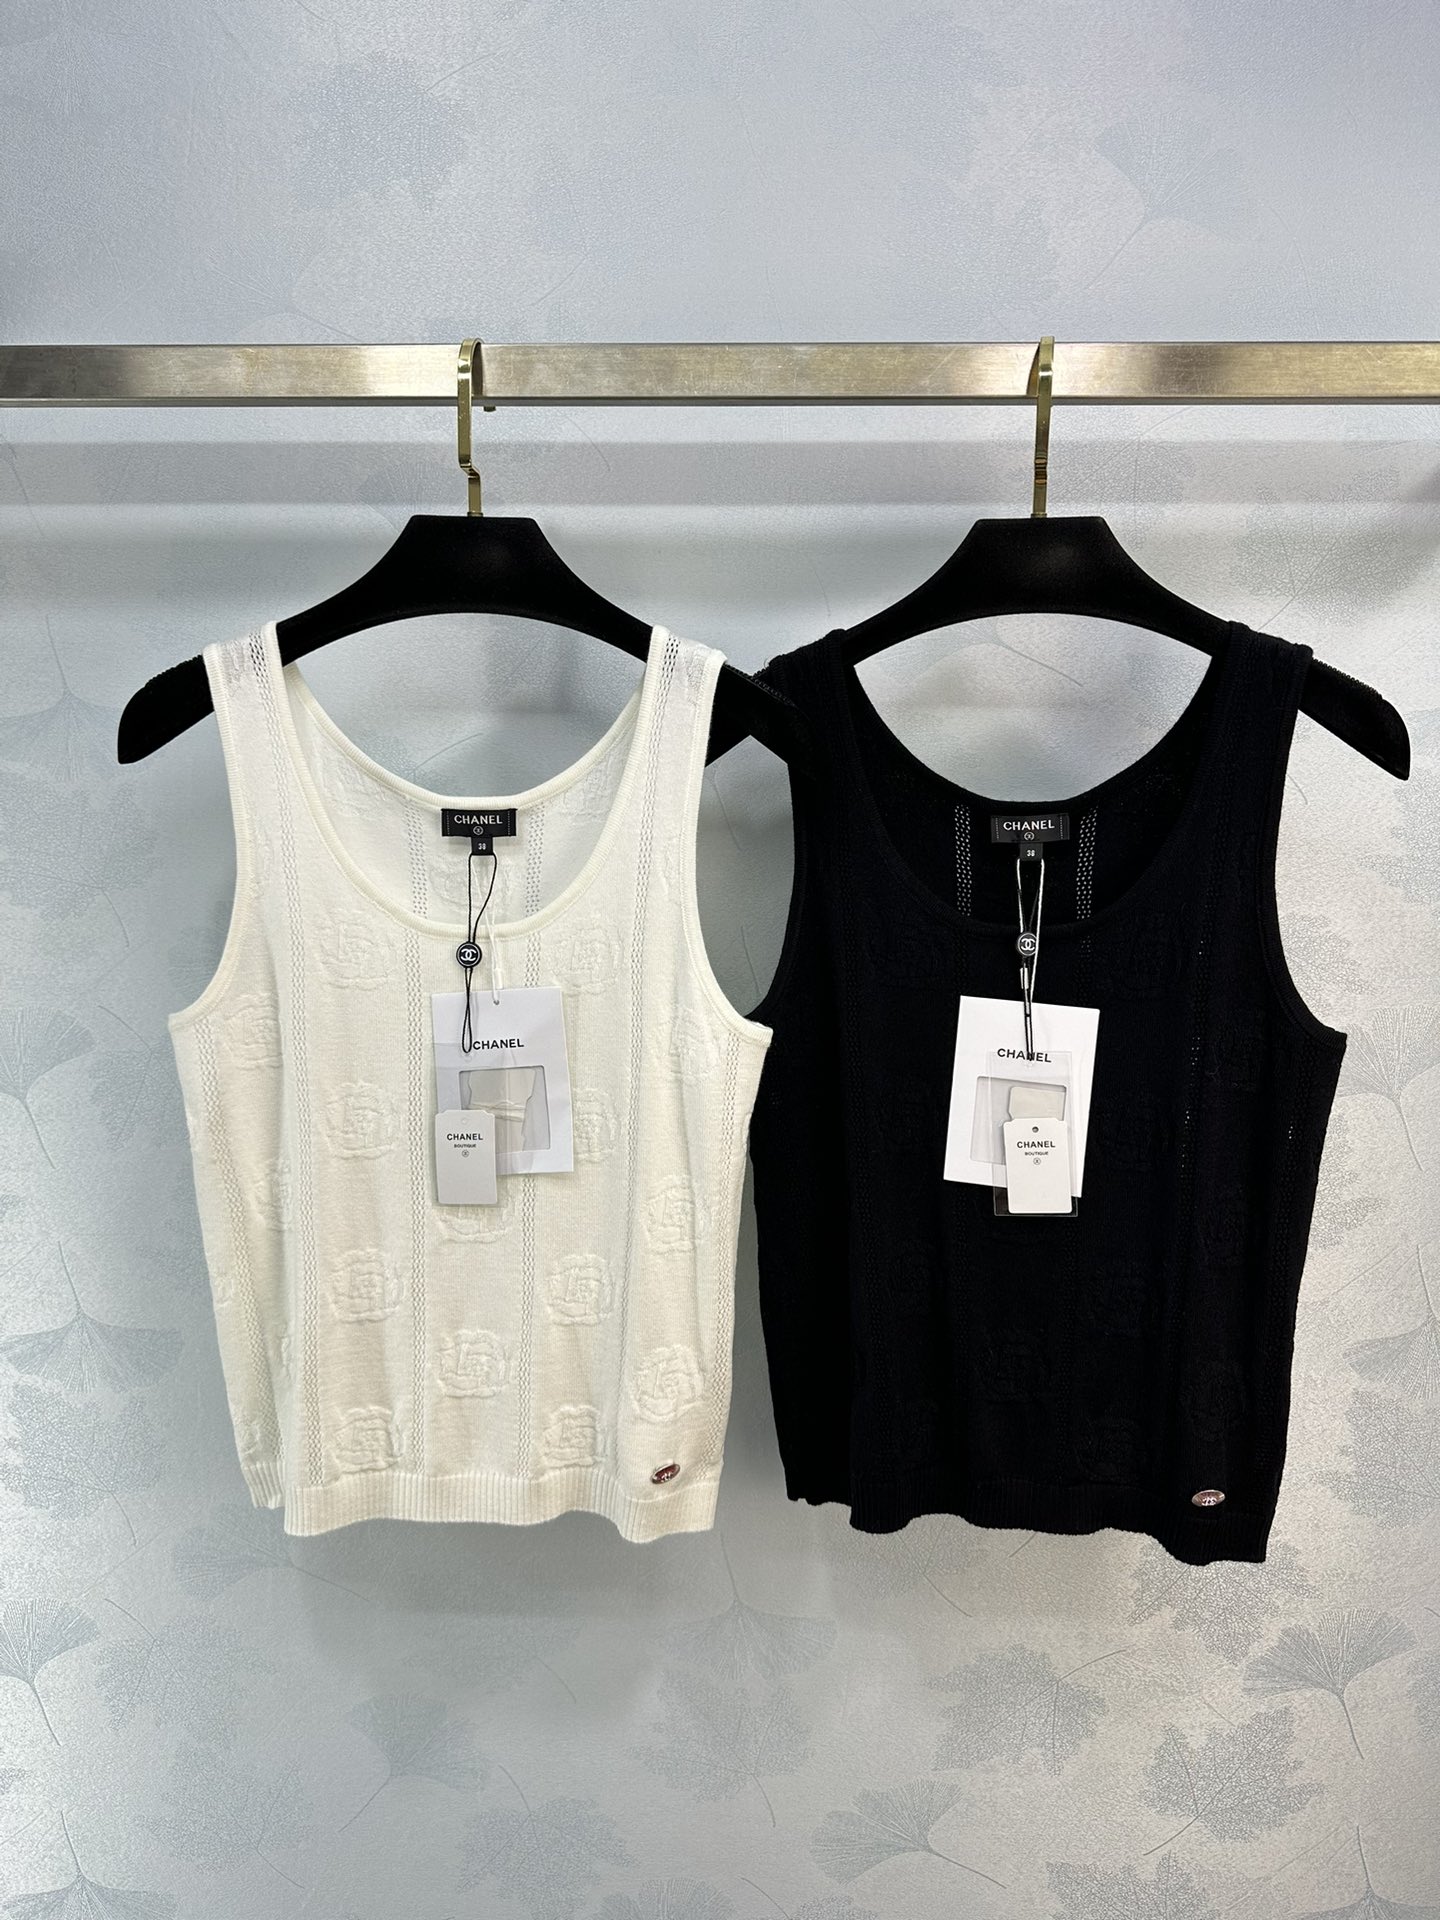 Chanel Clothing Tank Tops&Camis Openwork Knitting Spring/Summer Collection